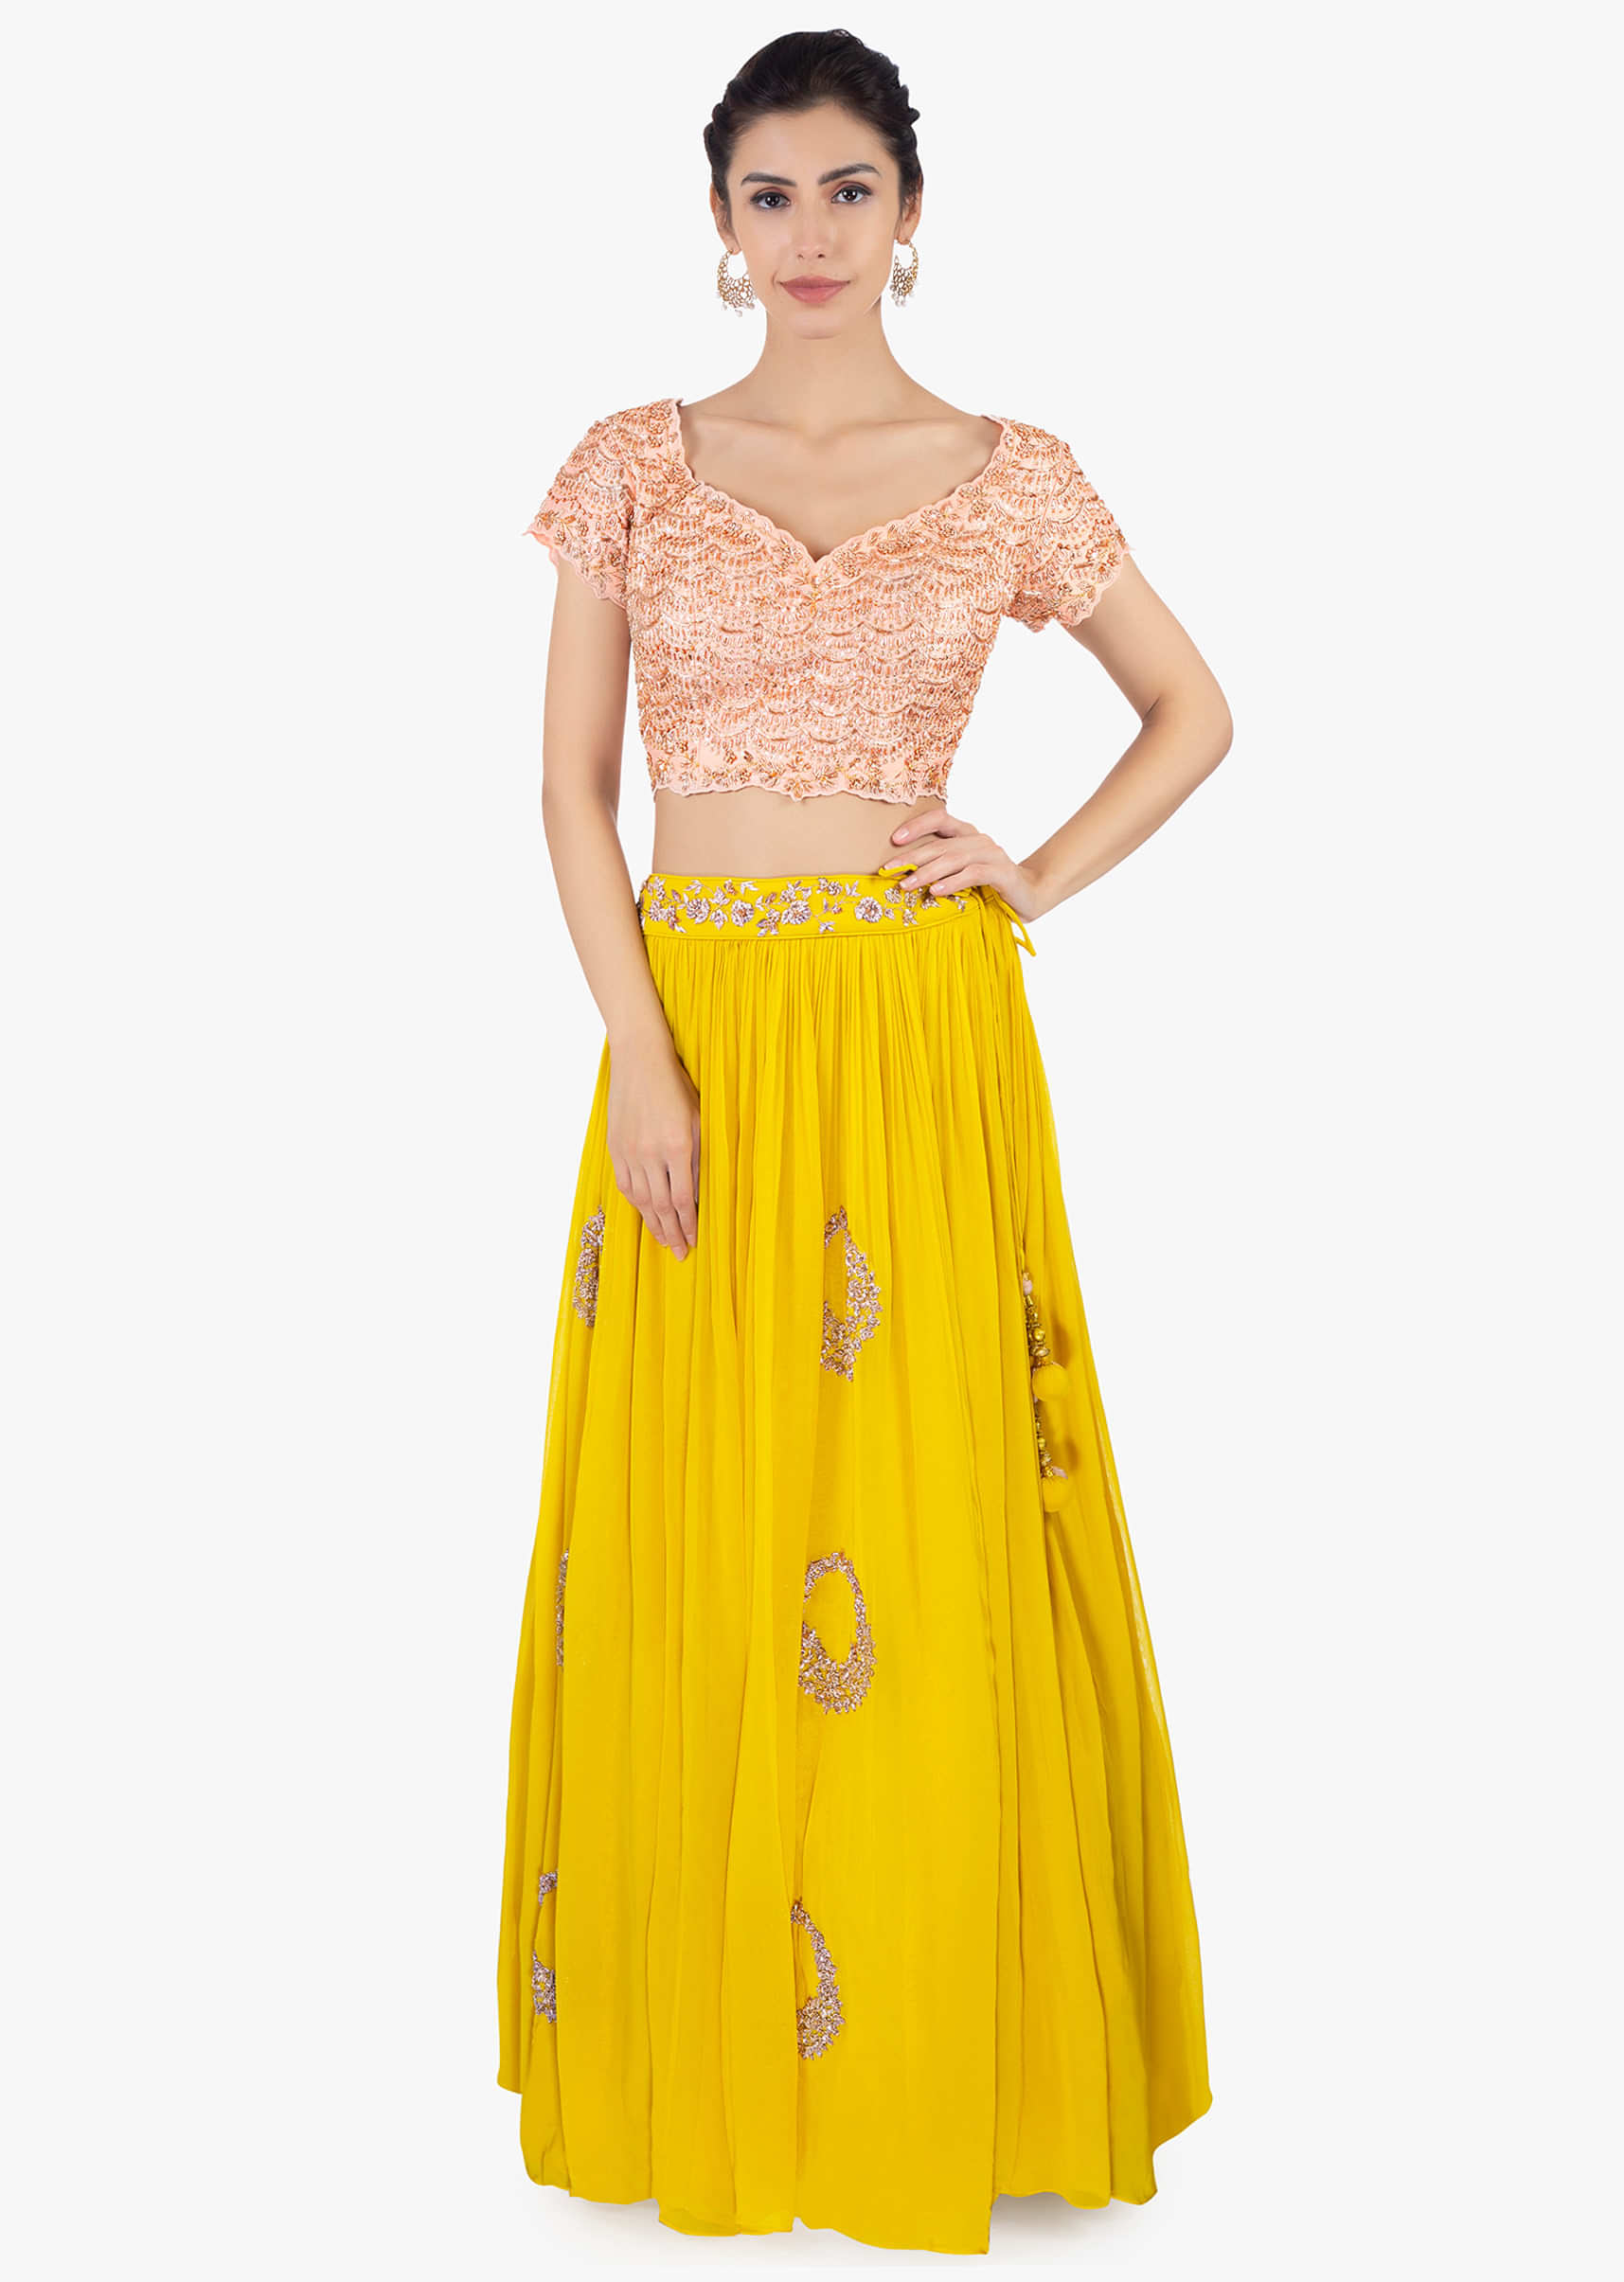 Canary yellow georgette skirt paired with a peach top and peach net dupatta